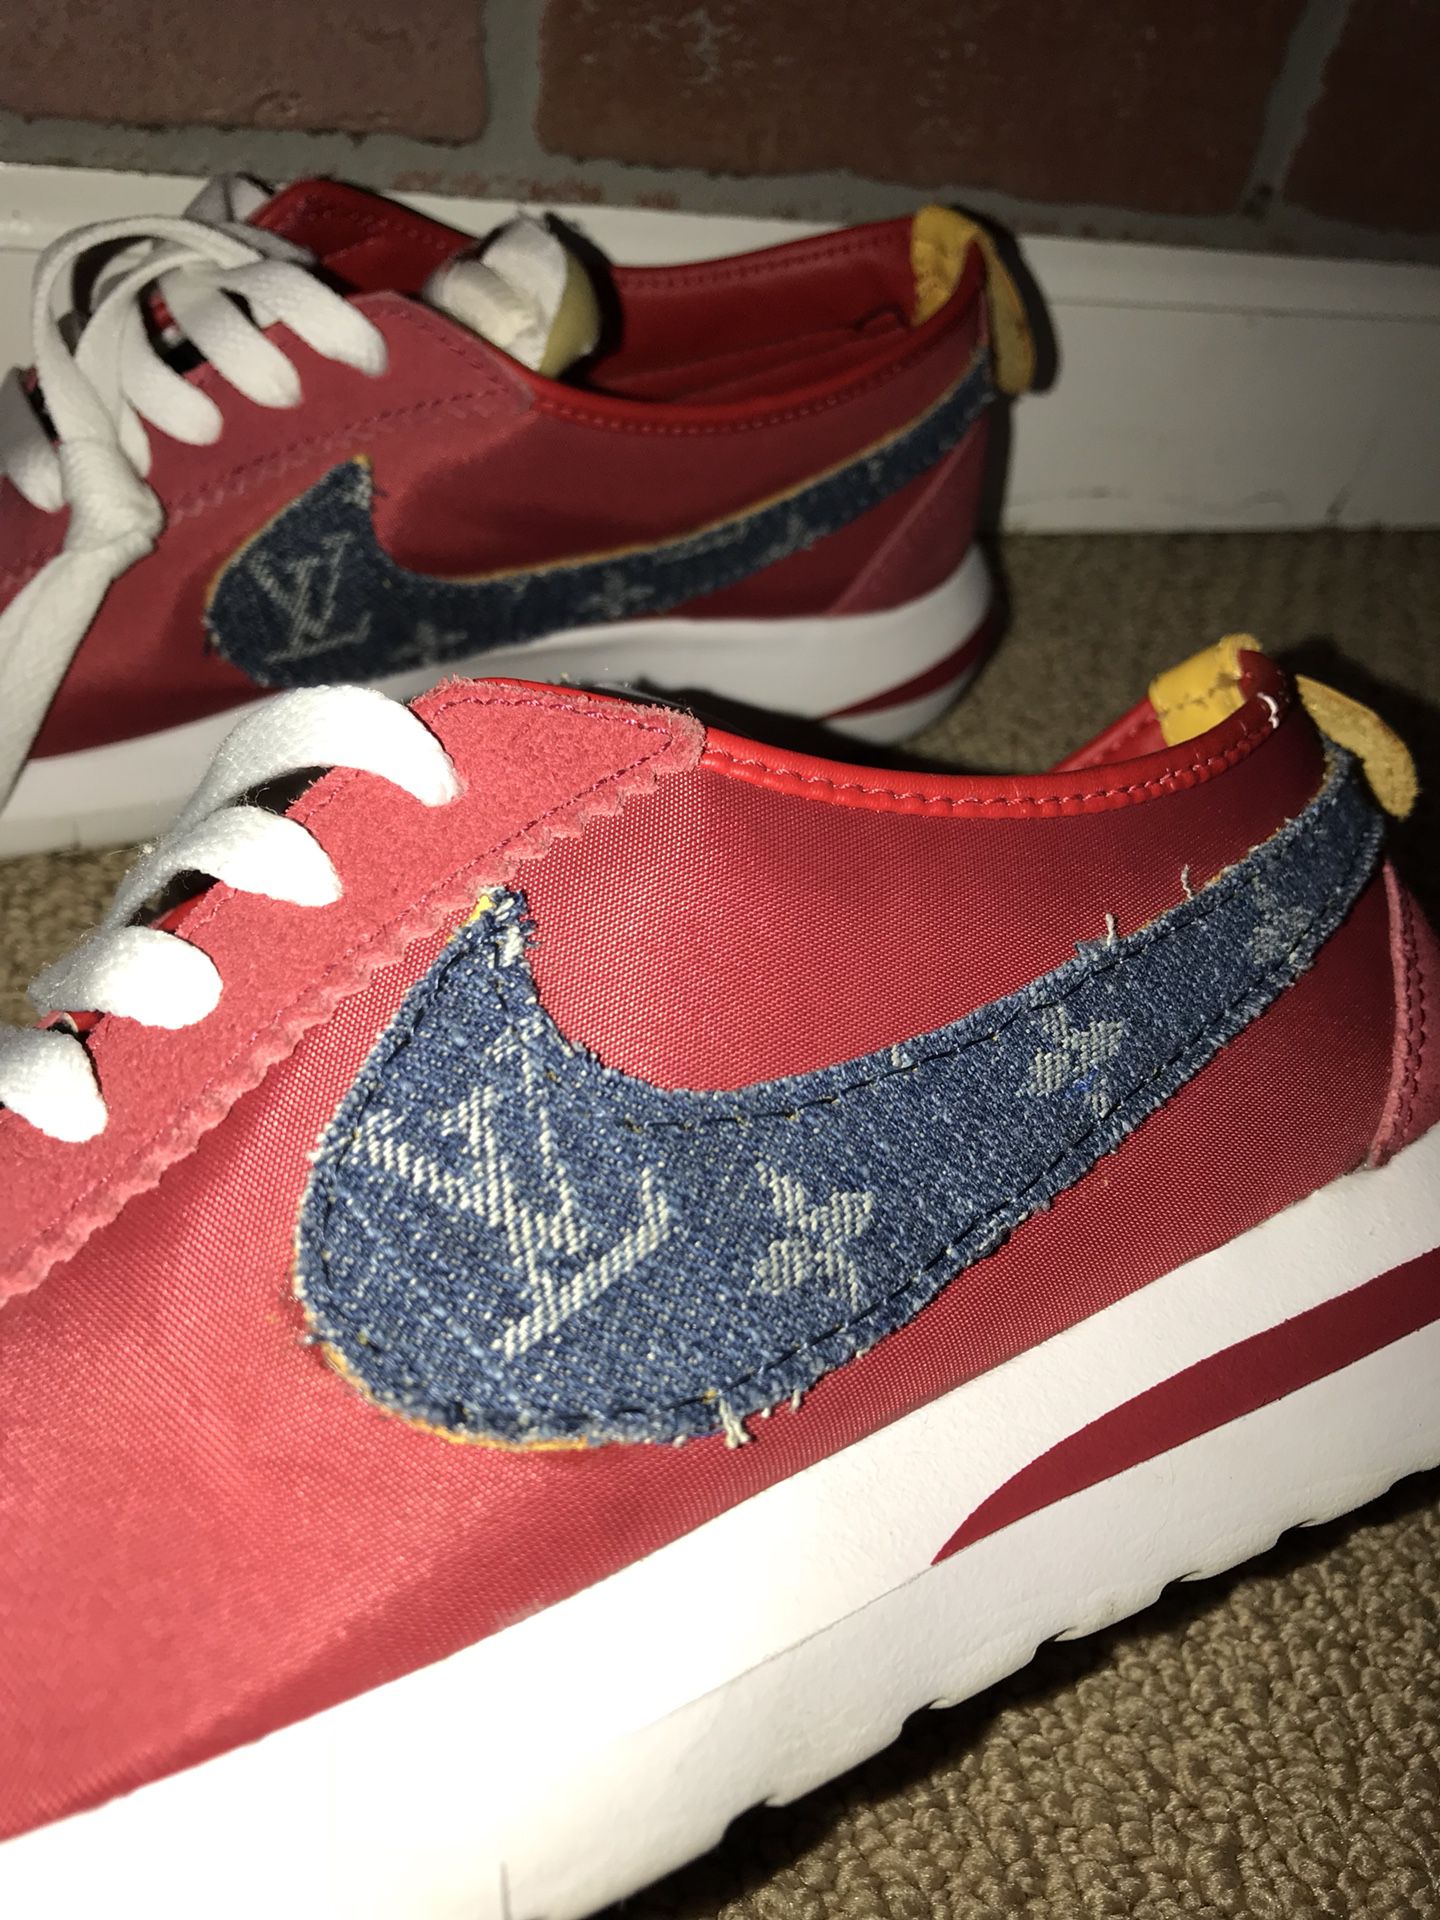 Custom Louis Vuitton x Nike Cortez runners for Sale in Scotts